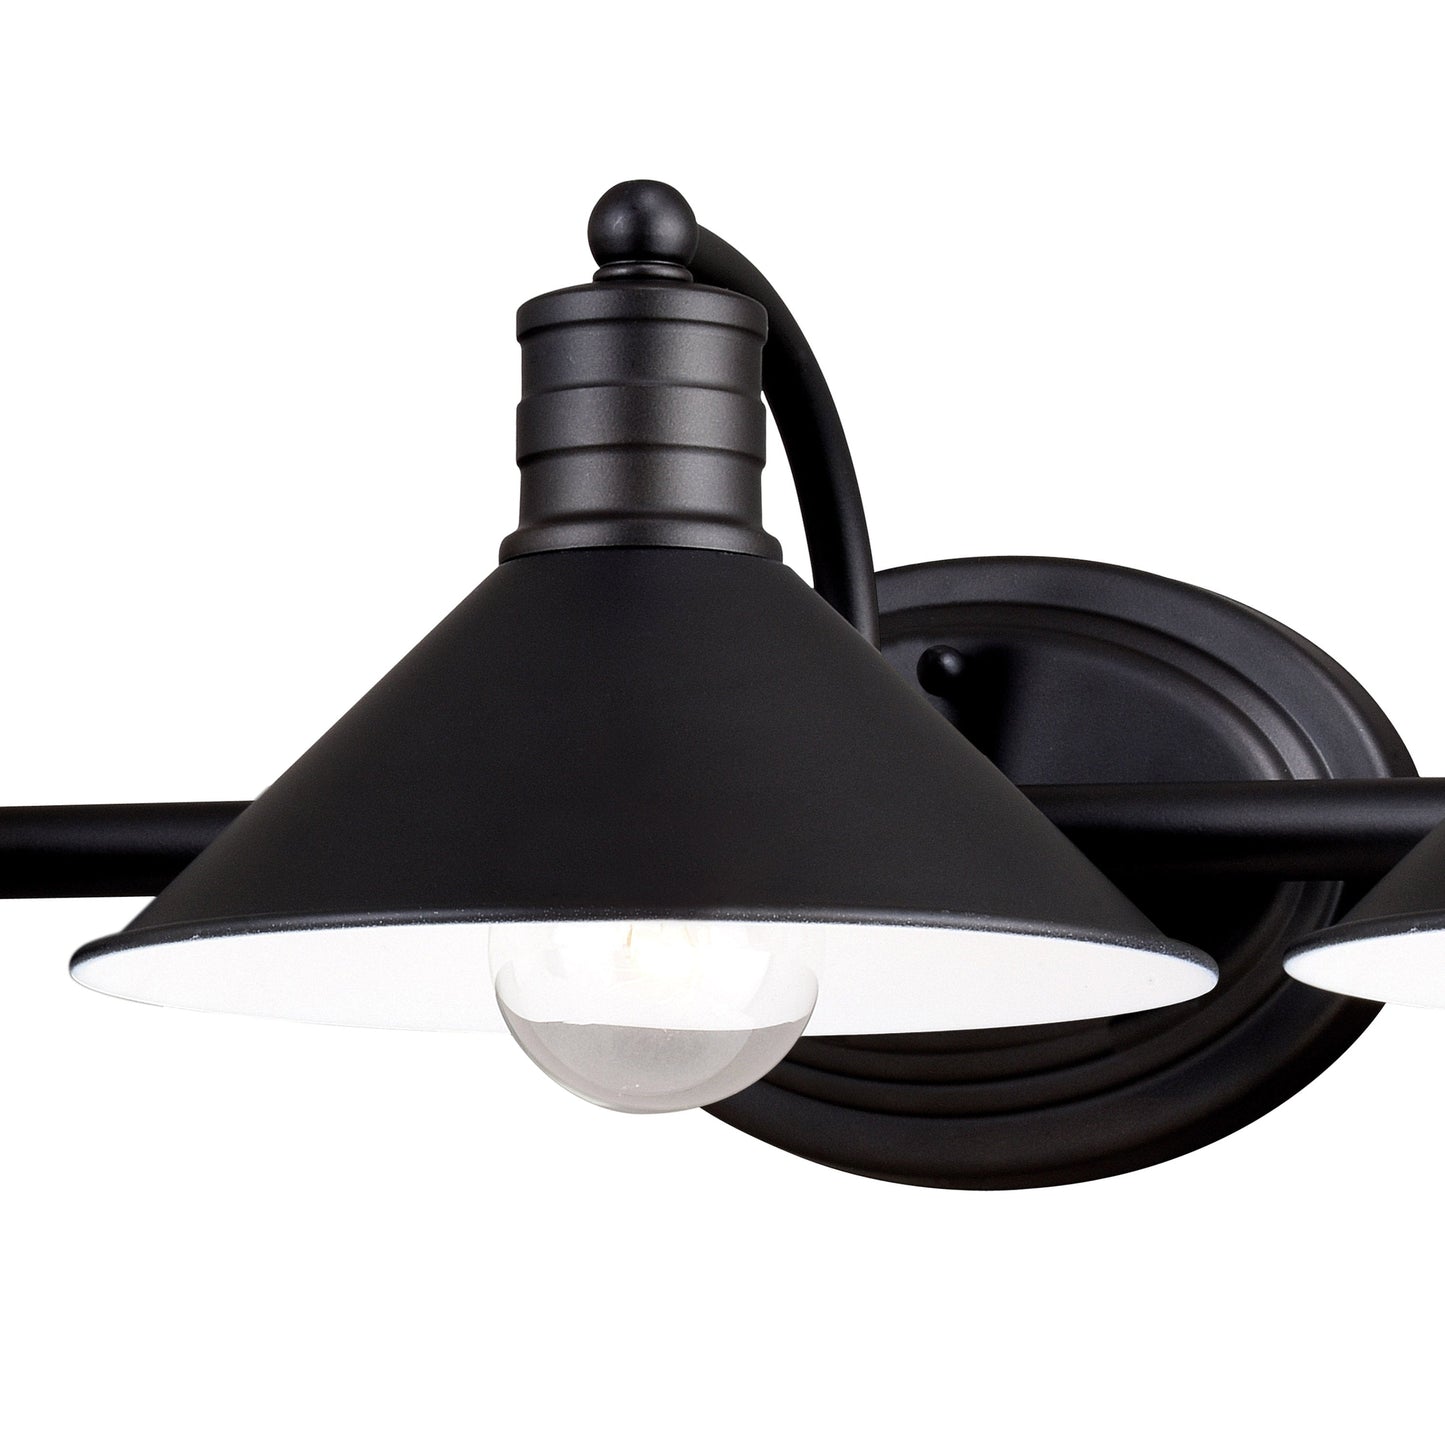 Vaxcel Akron 28" 3-Light Oil Rubbed Bronze and Matte White Vanity Light with Metal Shade